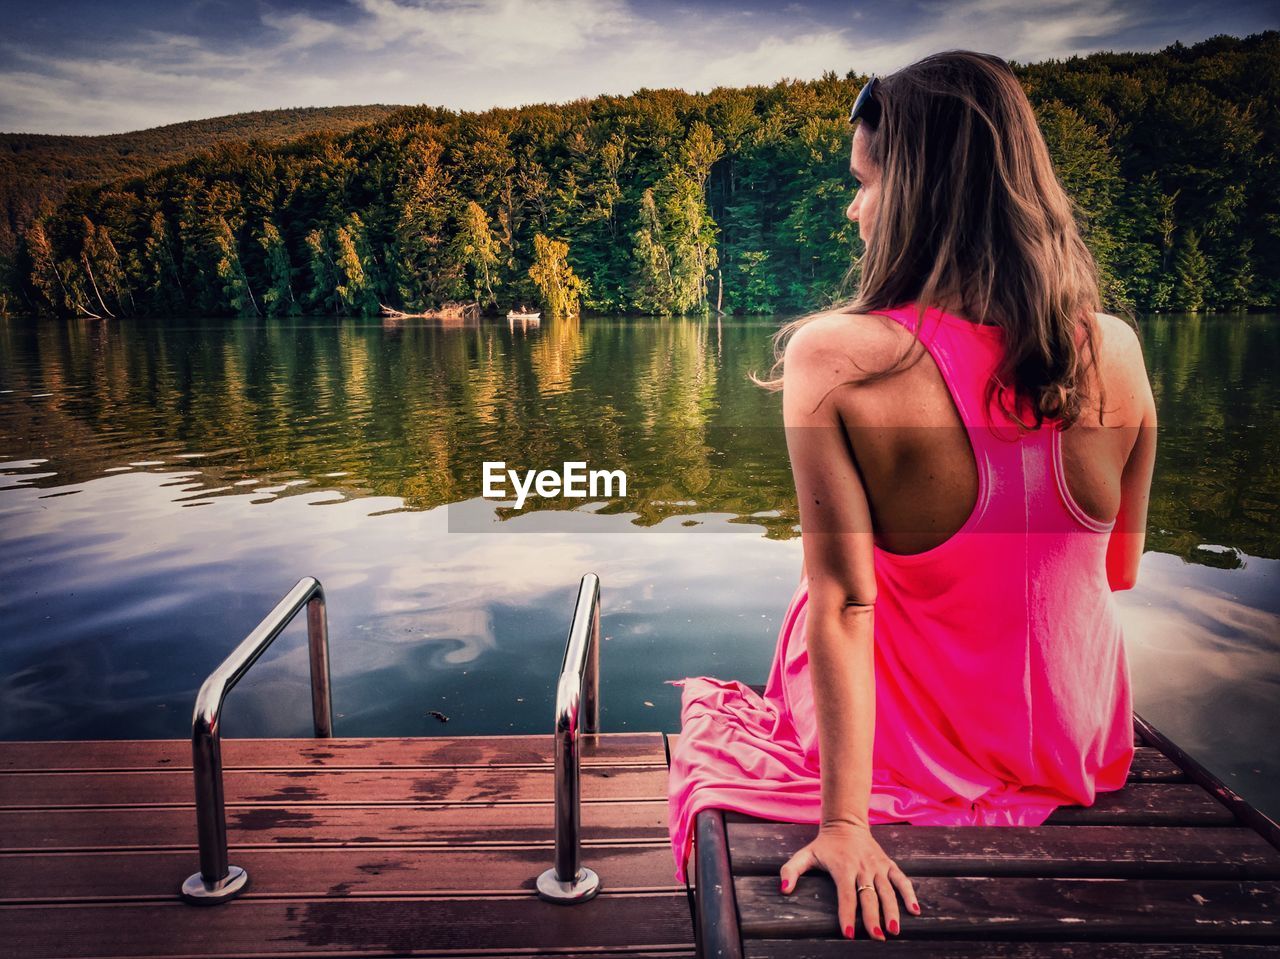 Rear view of woman sitting on lounge chair by lake against sky